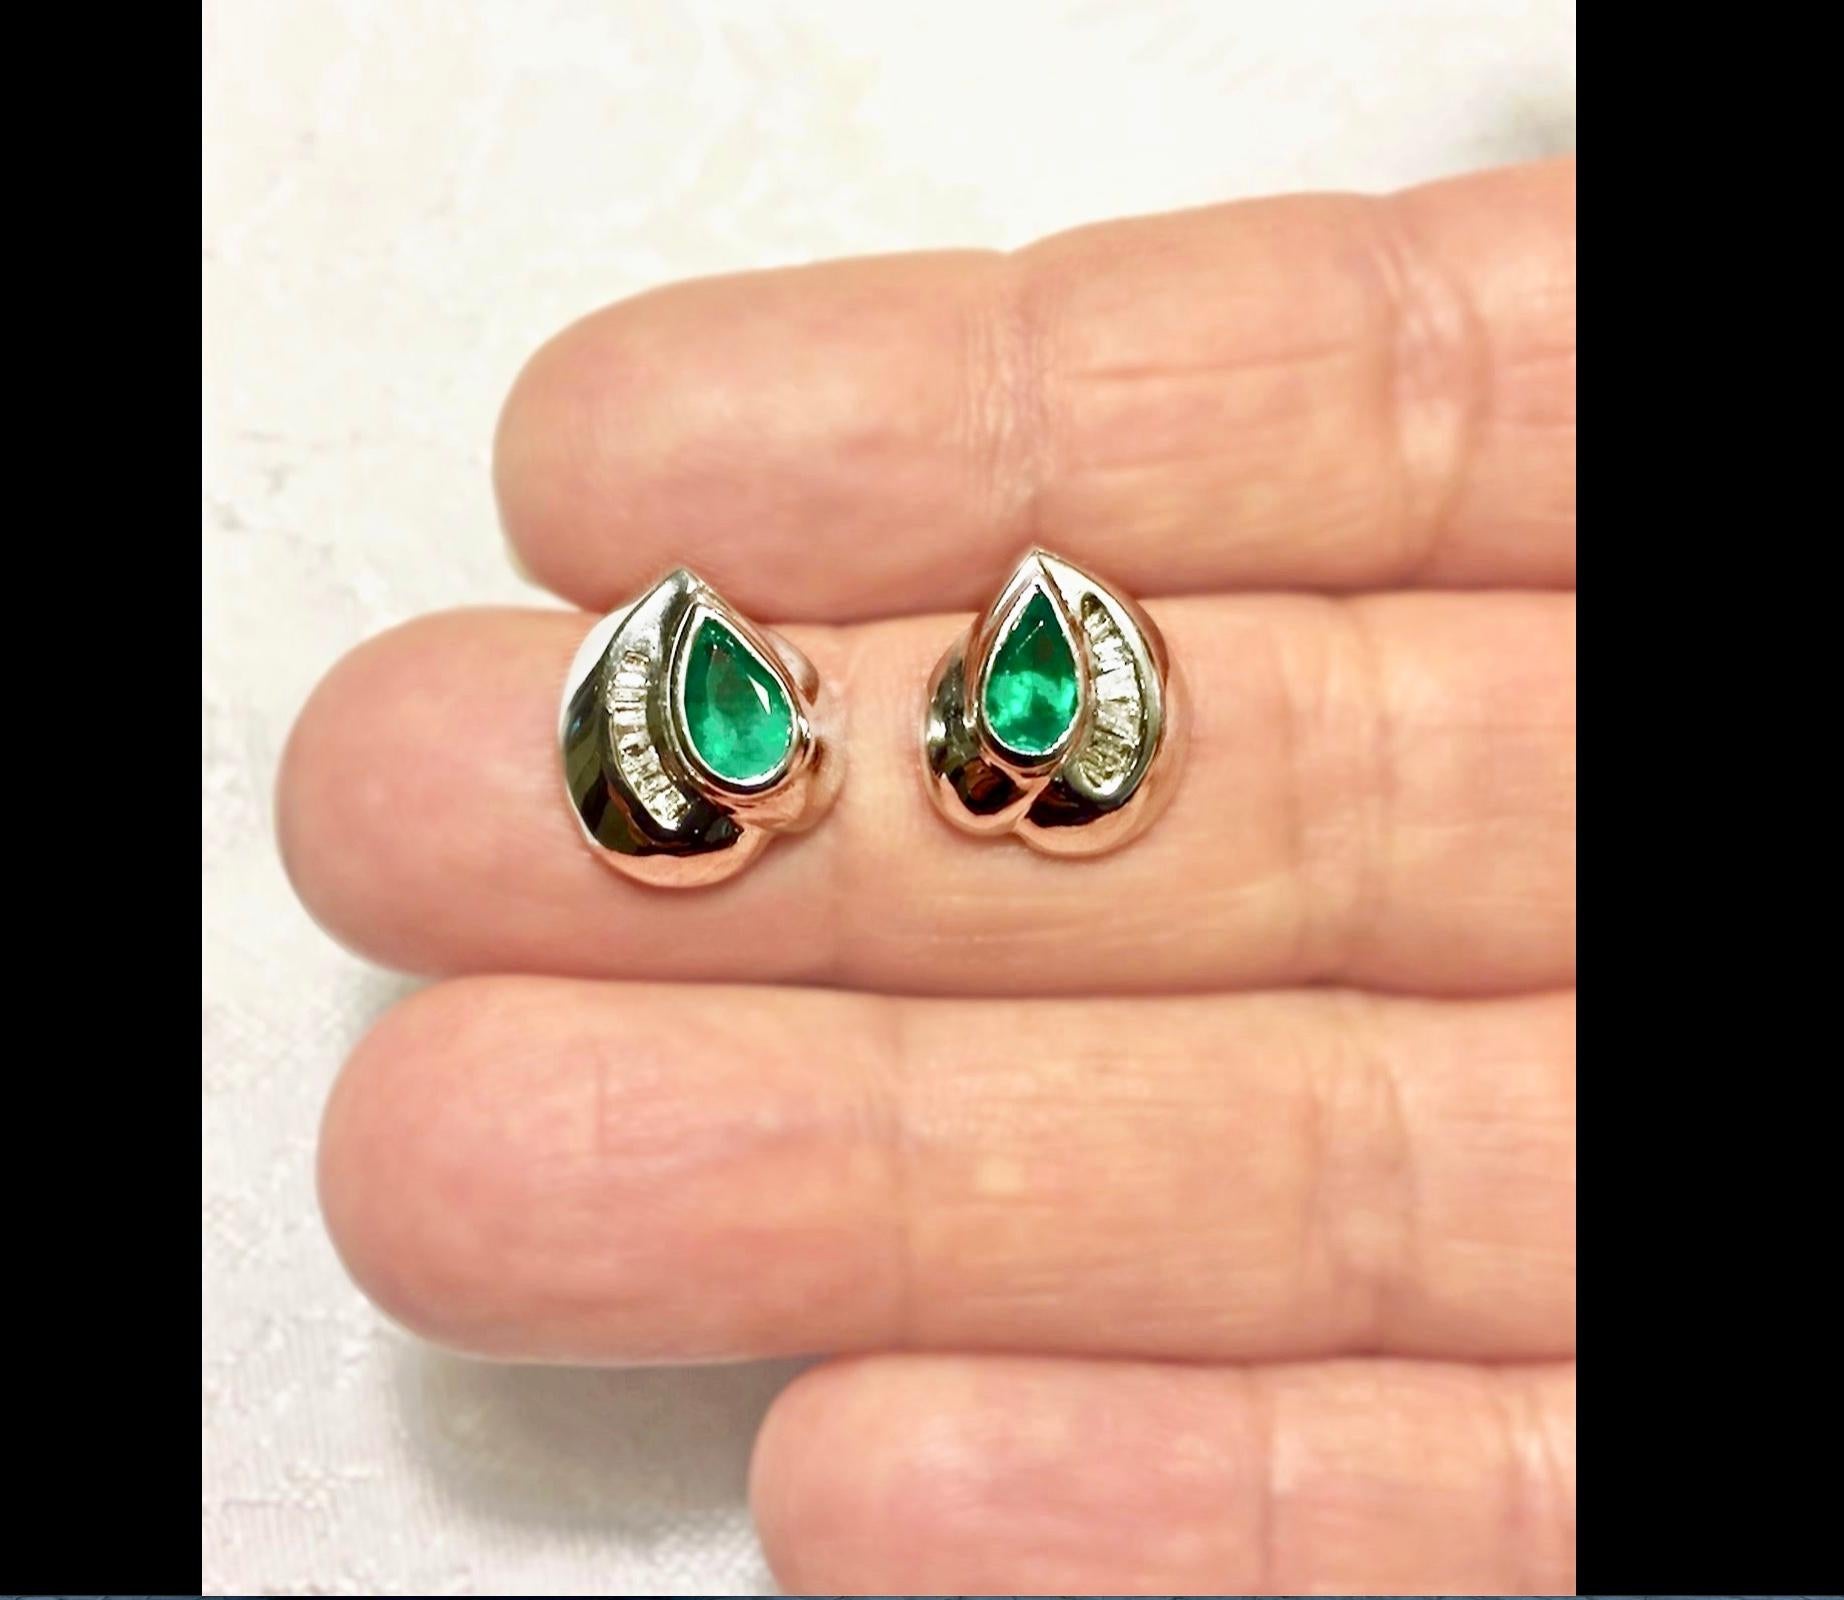 Composition: Solid White Gold 18K
Primary Stone:Natural Colombian Emerald
Shape or Cut: Pear Cut (6.30mm x 4.00mm each)
Approx Emerald Weight: 0.94 Carats (2 emeralds)
Treatment: no heat ~ Only Oil
Average Color/Clarity Emerald:Medium